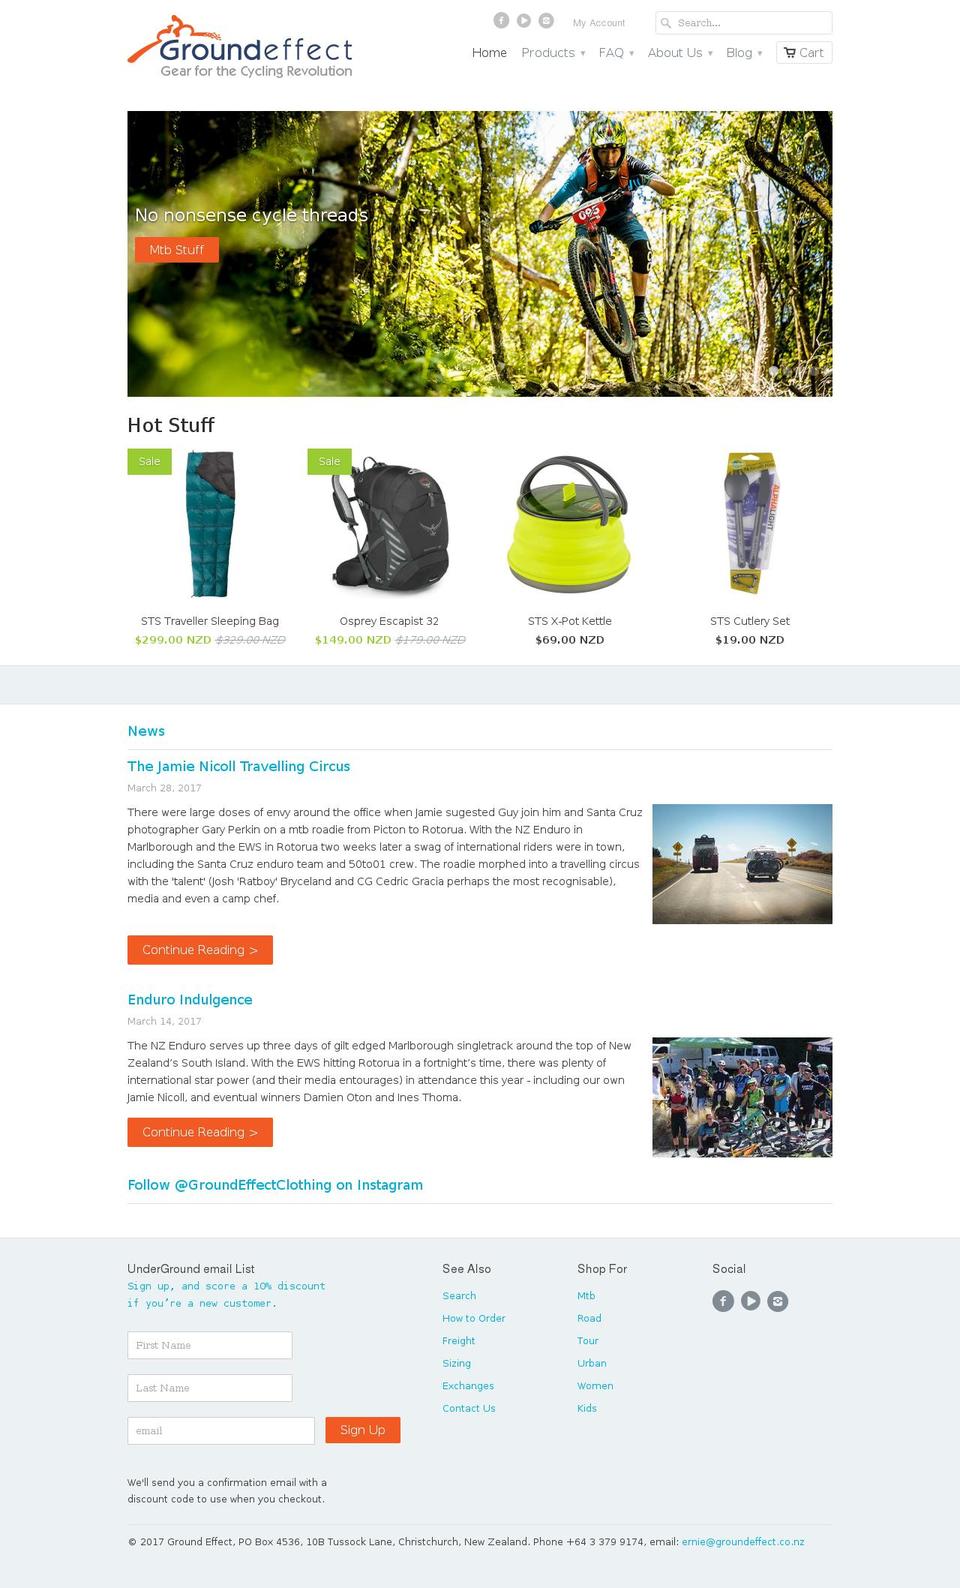 Portland Shopify theme site example groundeffect.co.nz